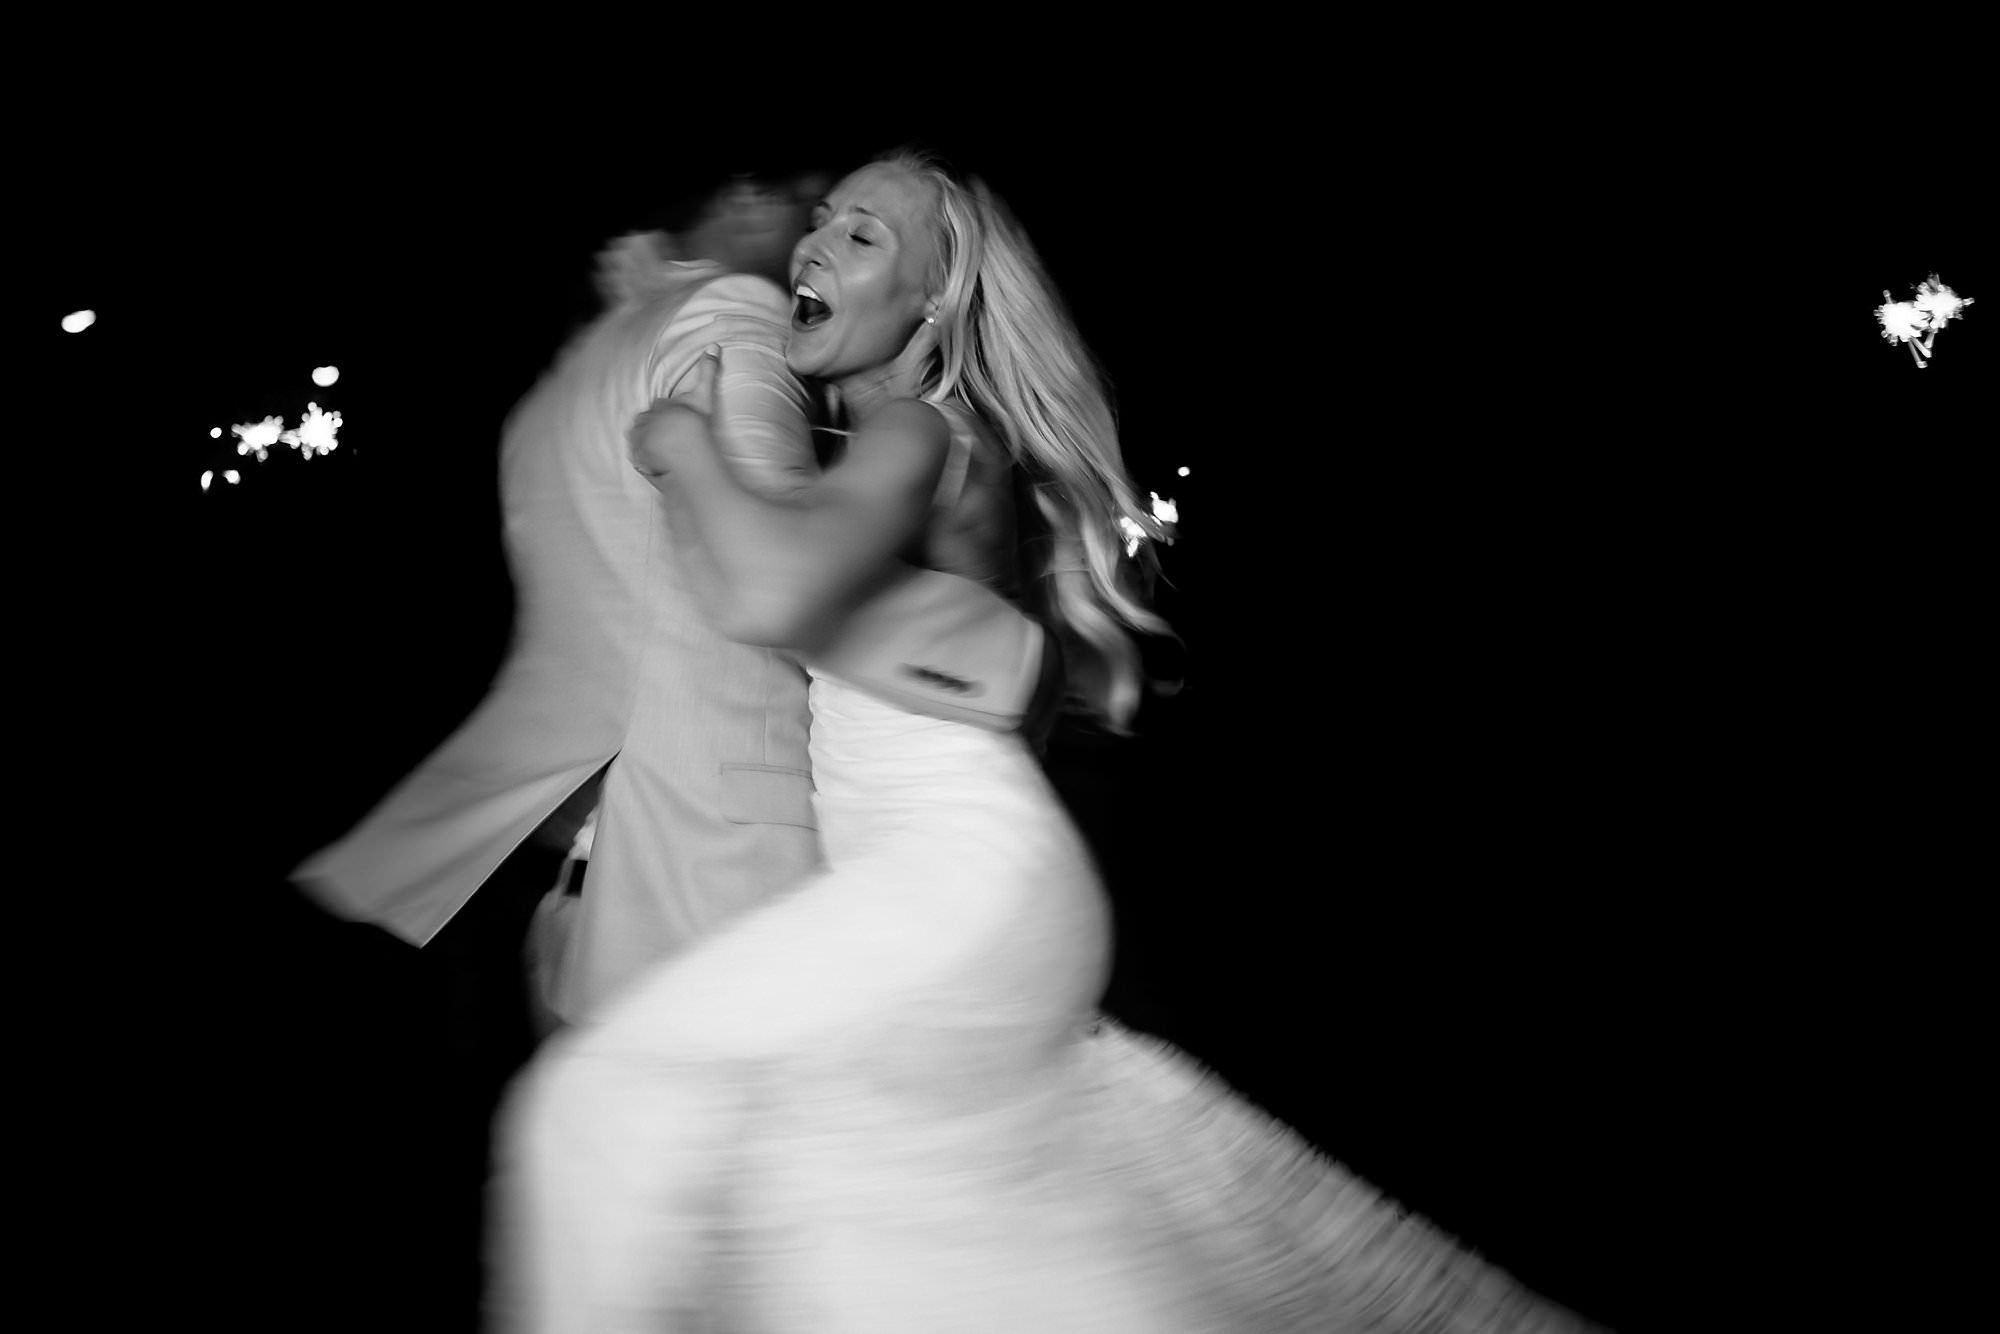 Black and white long exposure portrait of Groom spinning bride during sparkler exit in Destin Florida